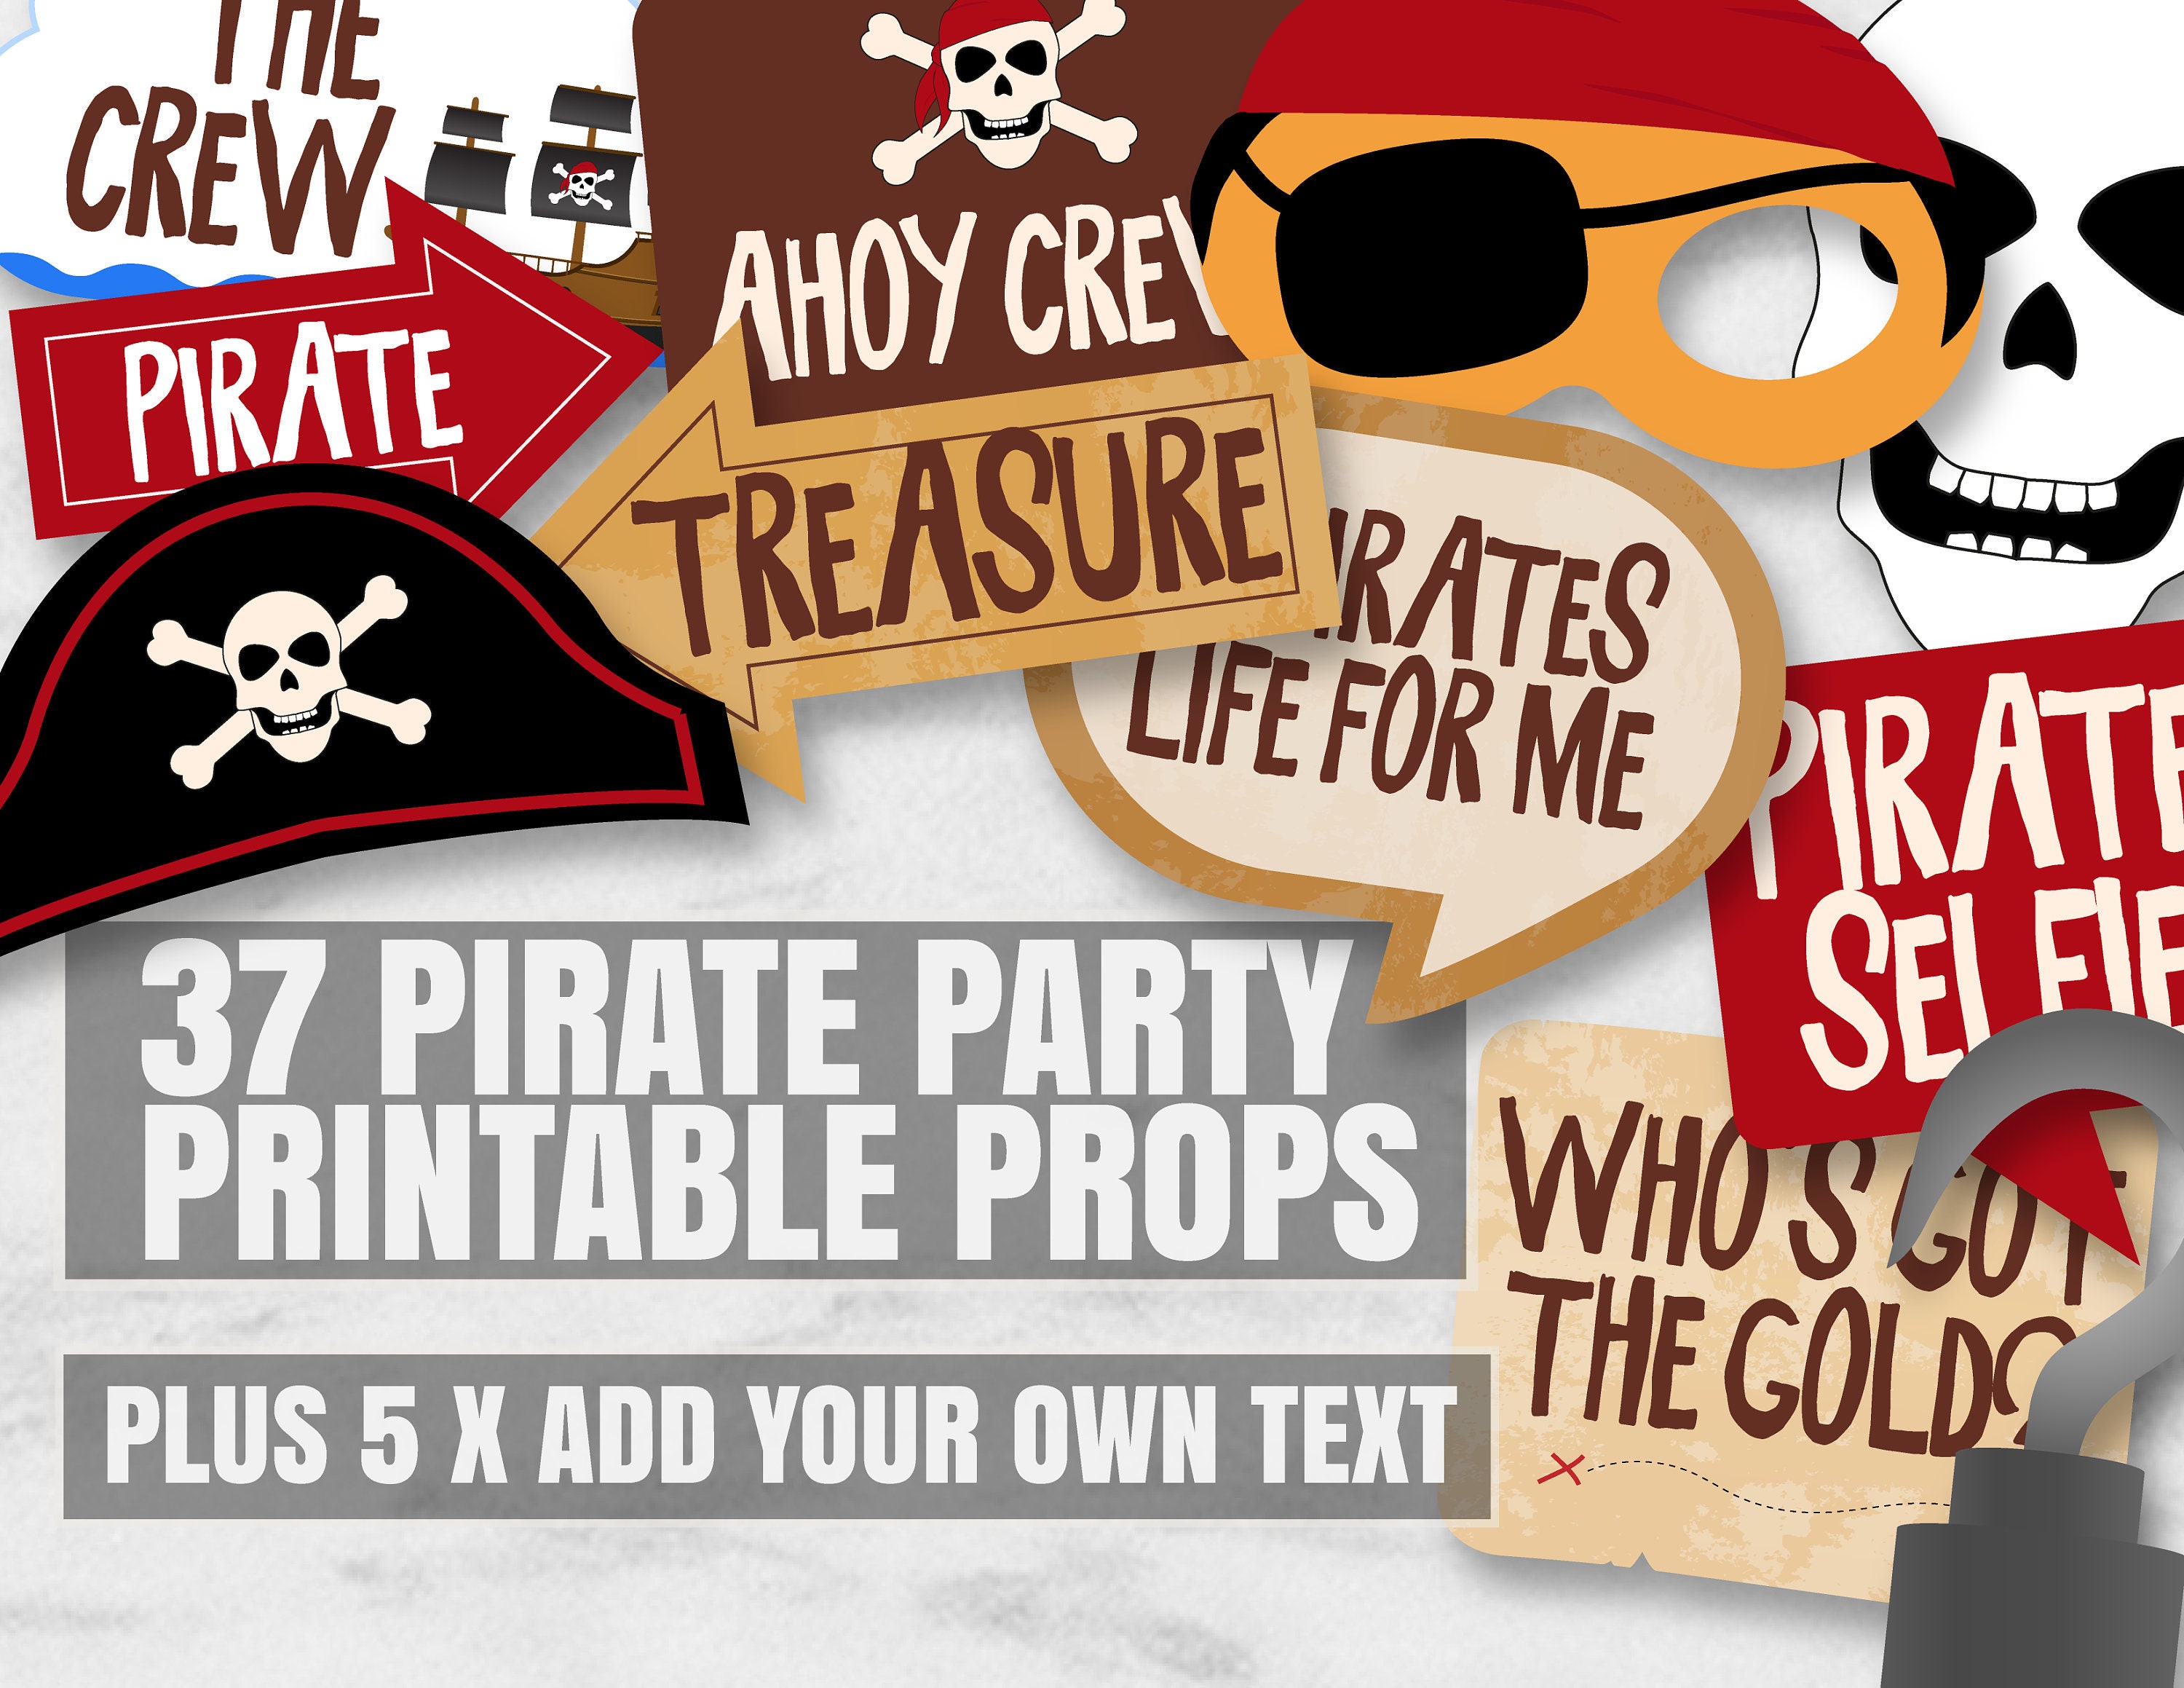 Pirate Photo Booth Props Printable, Pirate Party Themed Props, 42